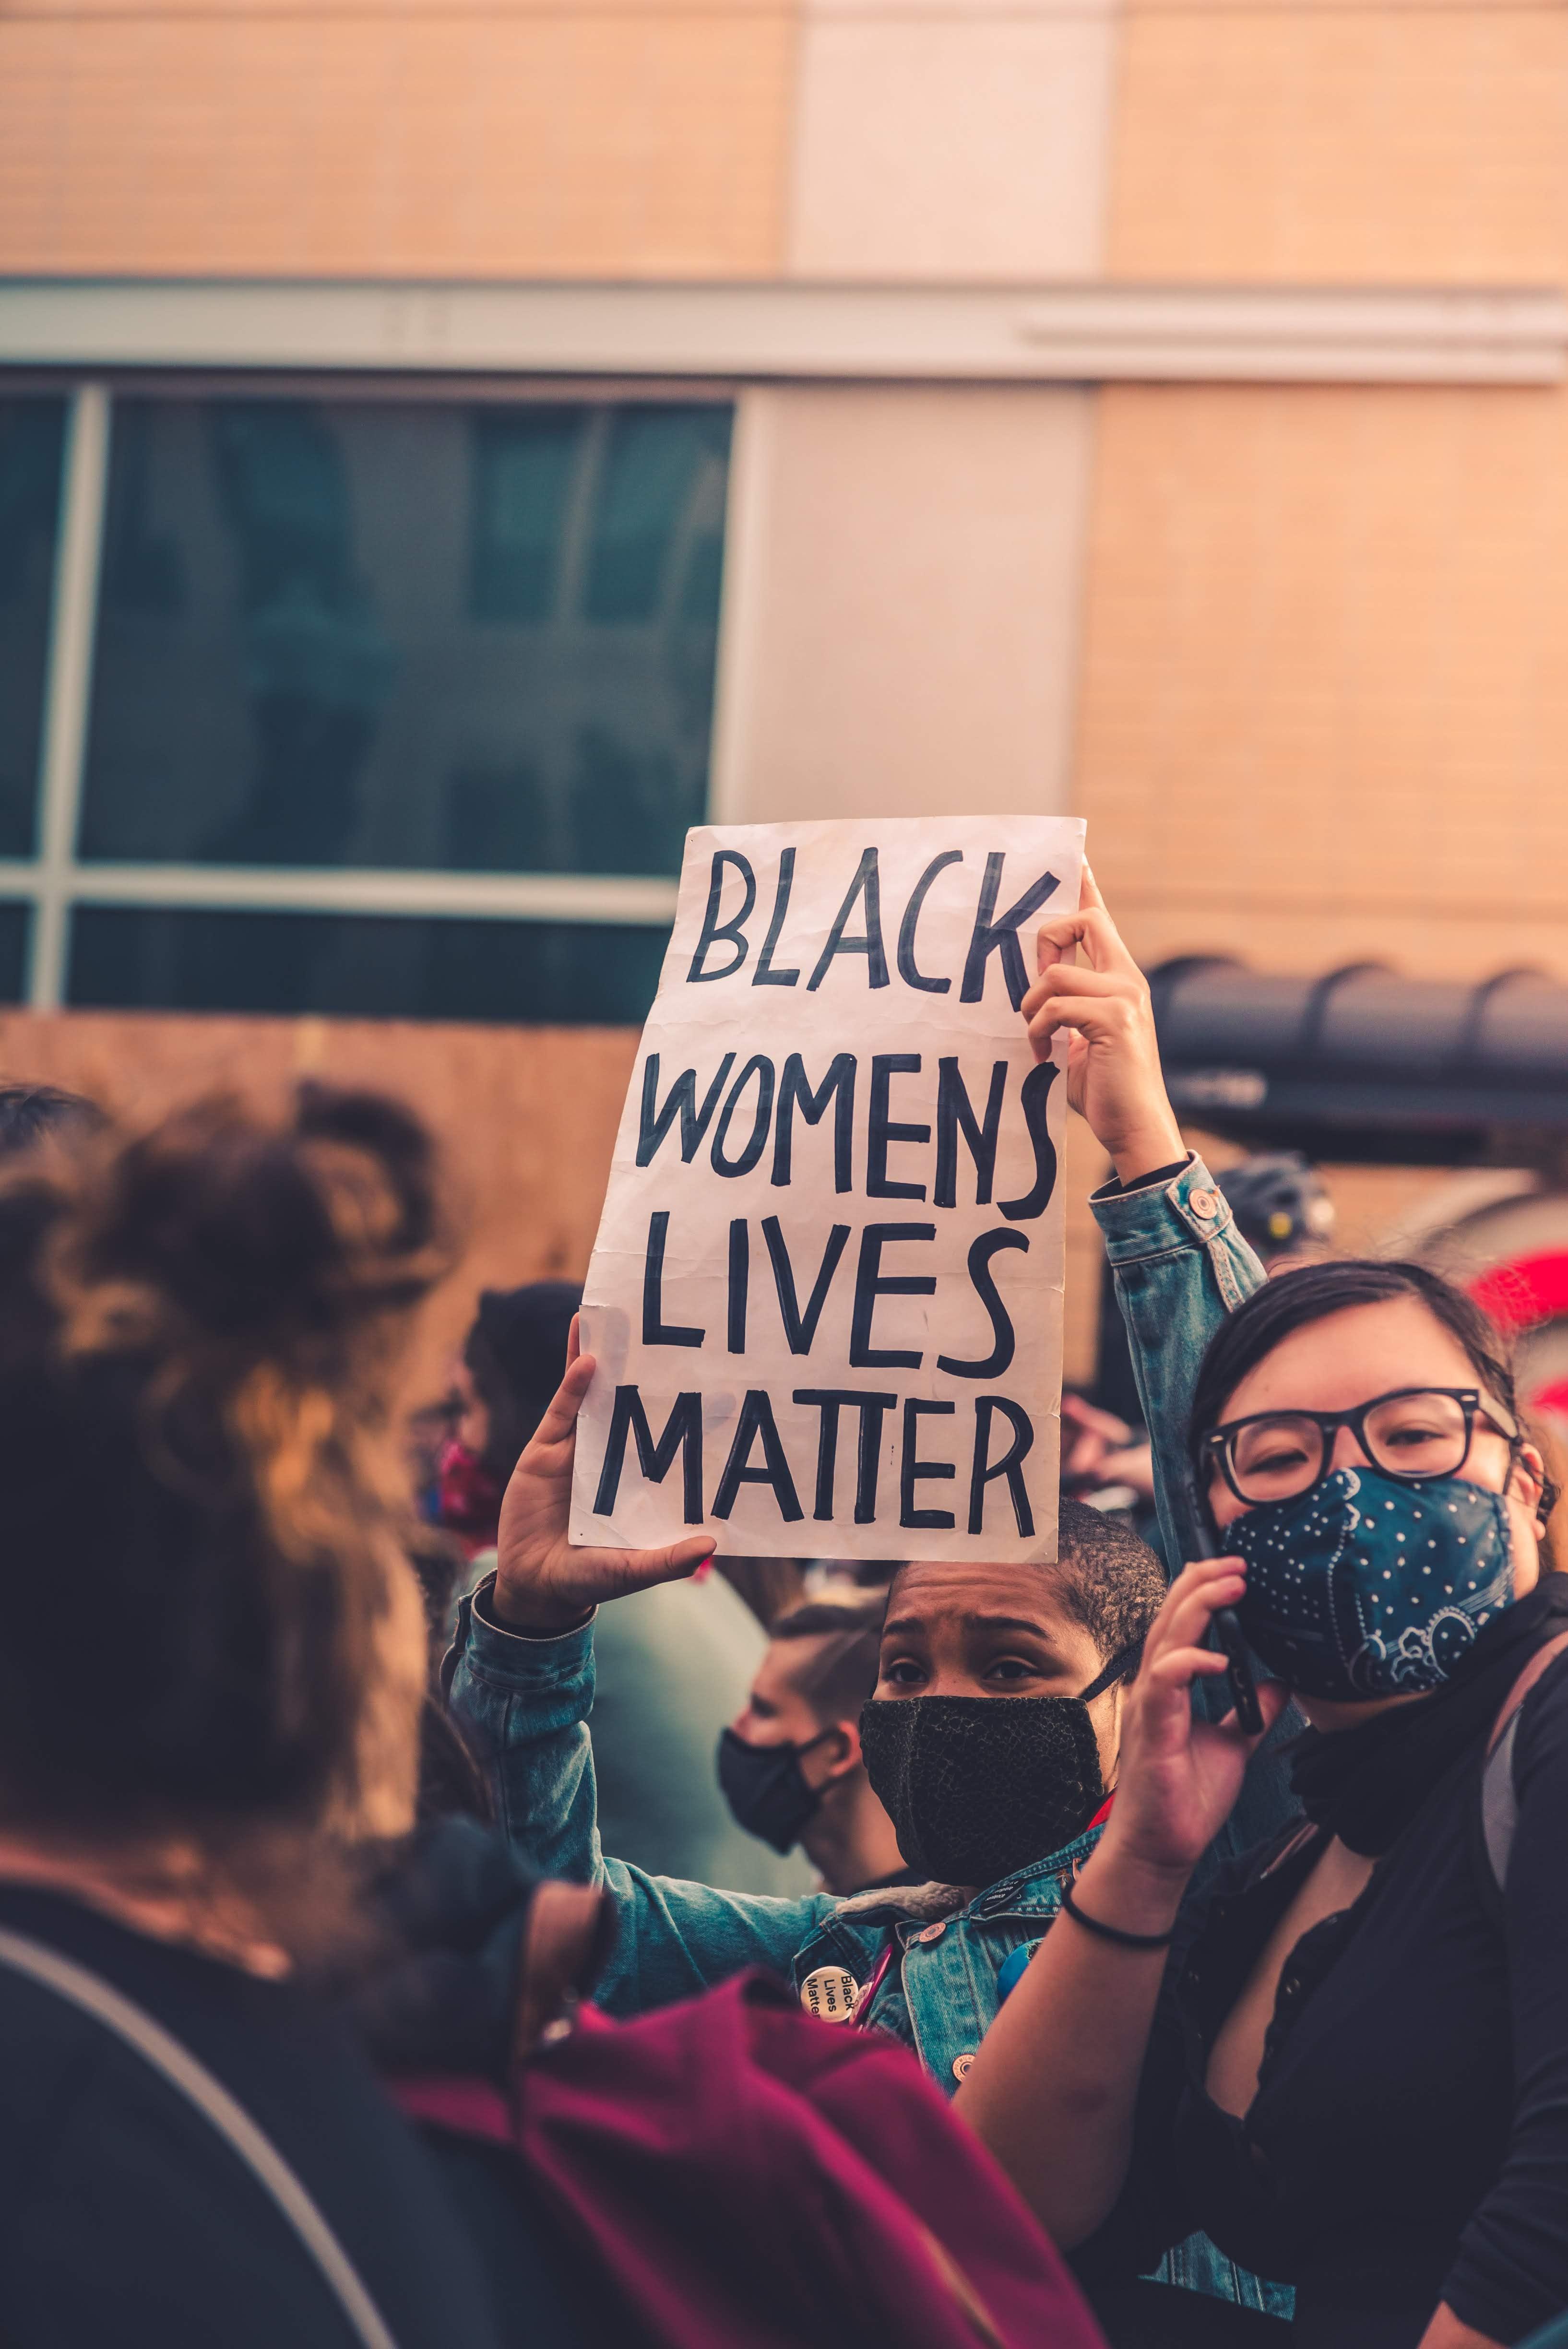 A person in a crowd at a black lives matter protest holding up a sign that says "black women's lives matter"